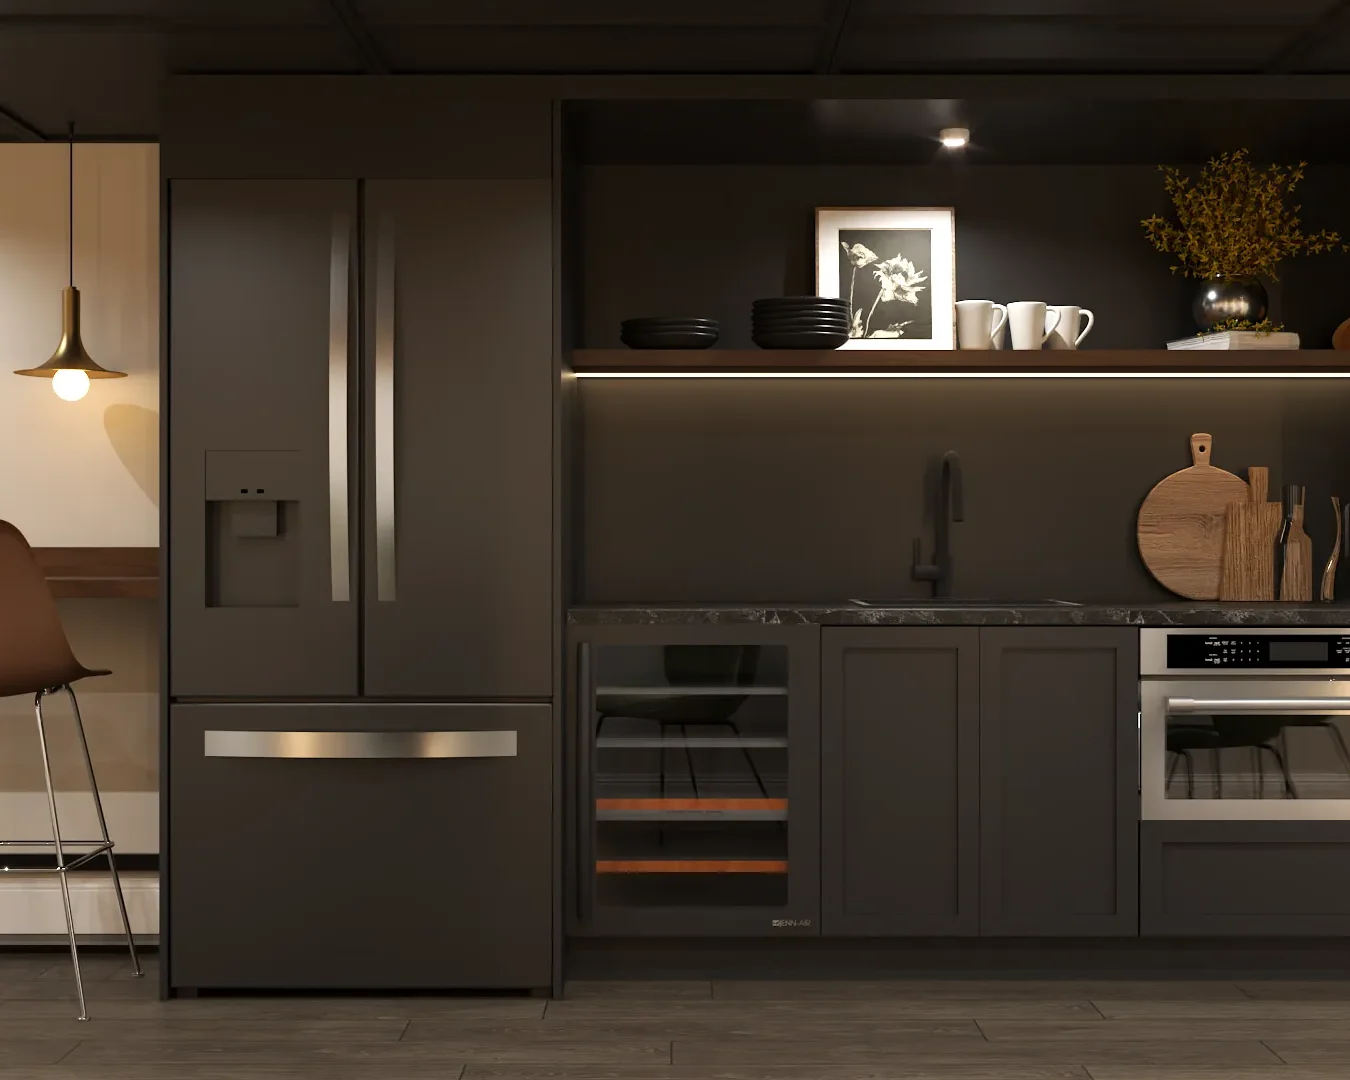 Contemporary kitchen with dark cabinetry and wooden details, featuring integrated appliances for a clean, modern look. Design by Debora, based in New York.